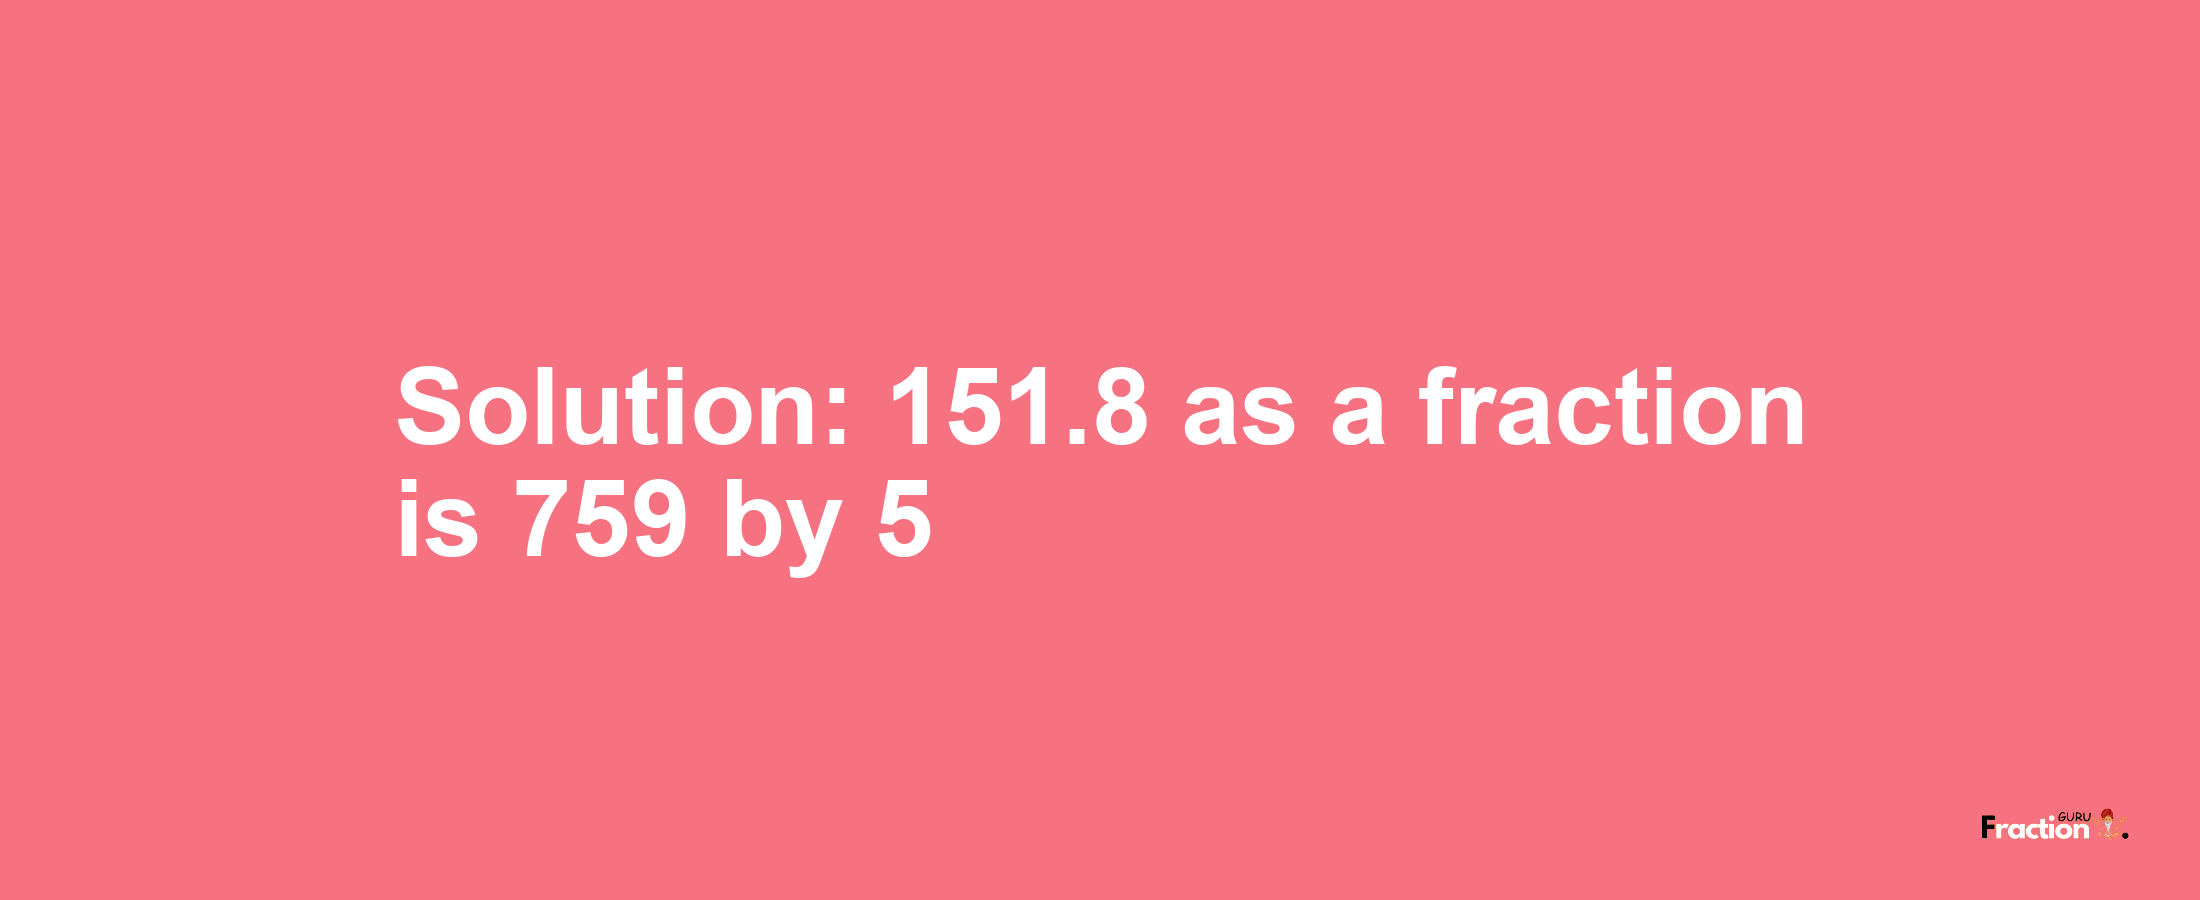 Solution:151.8 as a fraction is 759/5